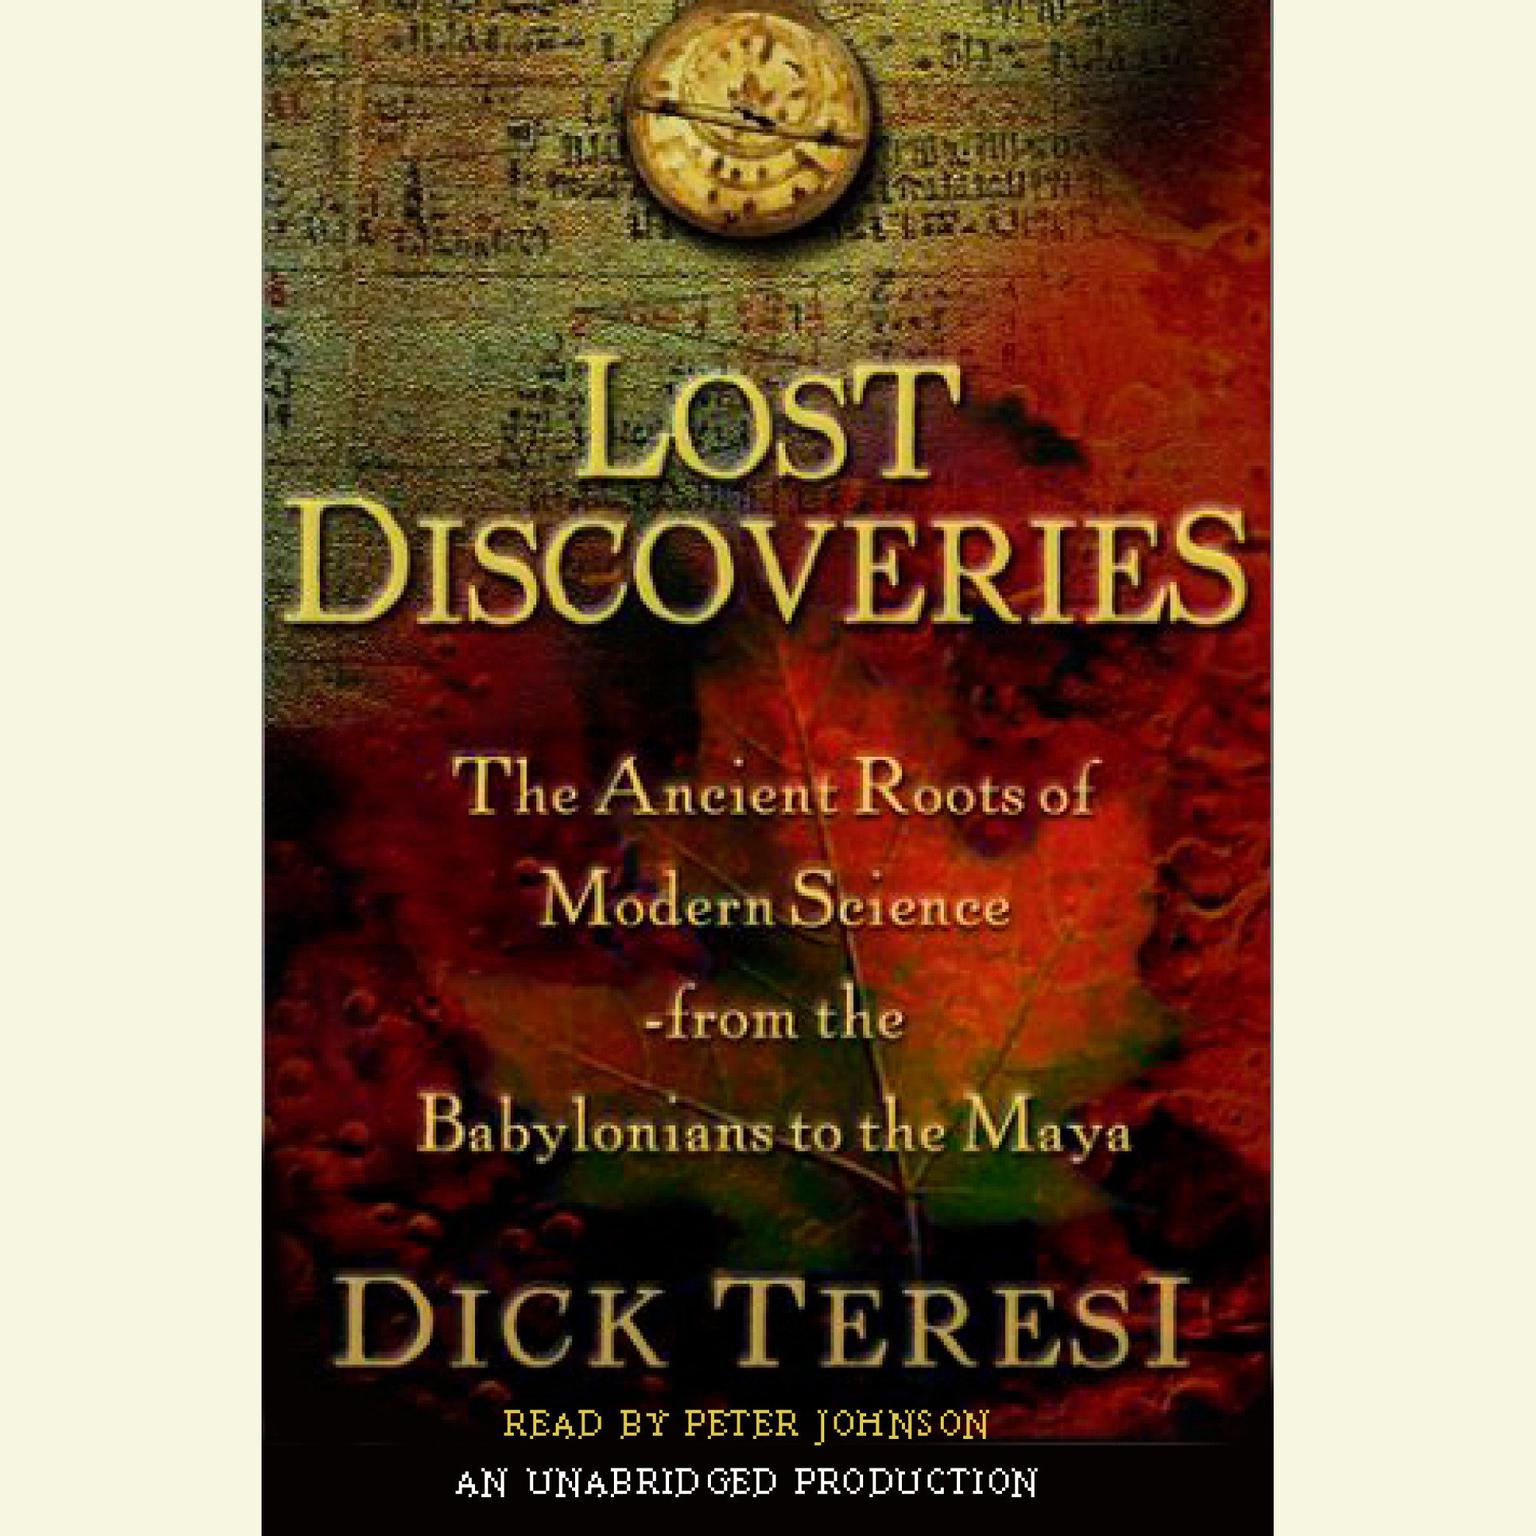 Lost Discoveries: The Ancient Roots of Modern Science from the Babylonians to the Mayans Audiobook, by Dick Teresi